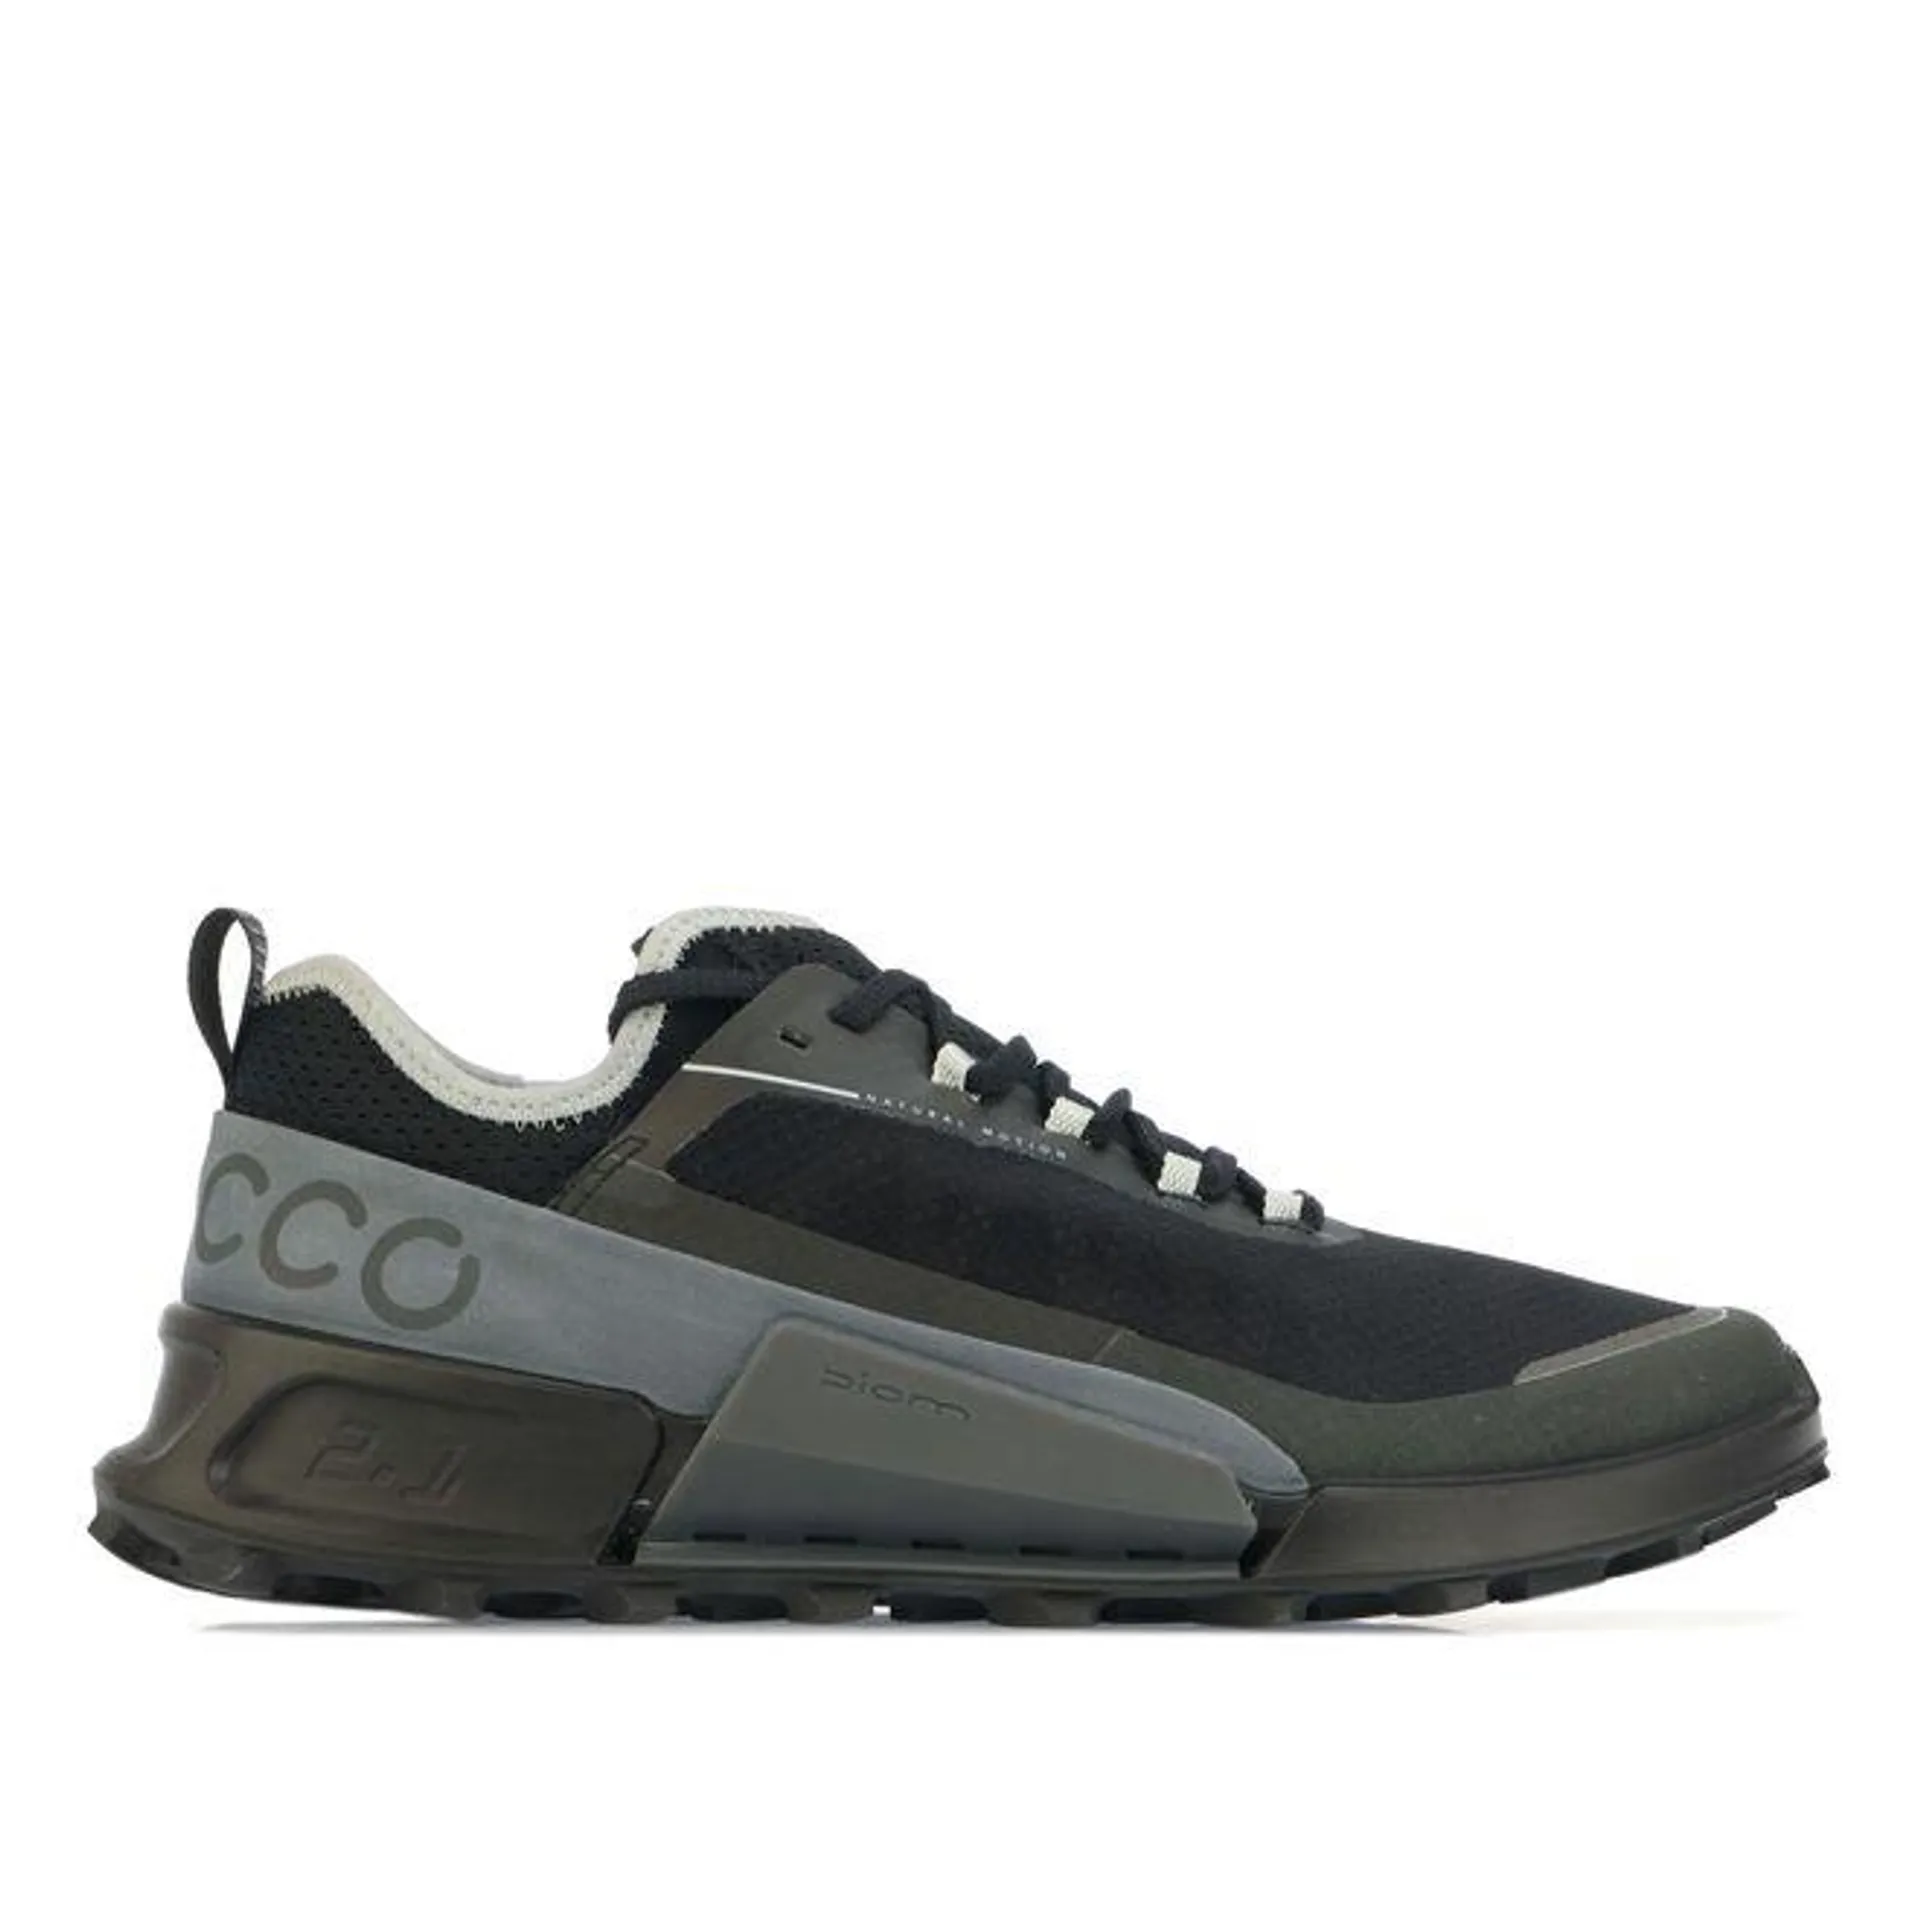 ECCO Mens Biom 21 X Country Trainers in Black